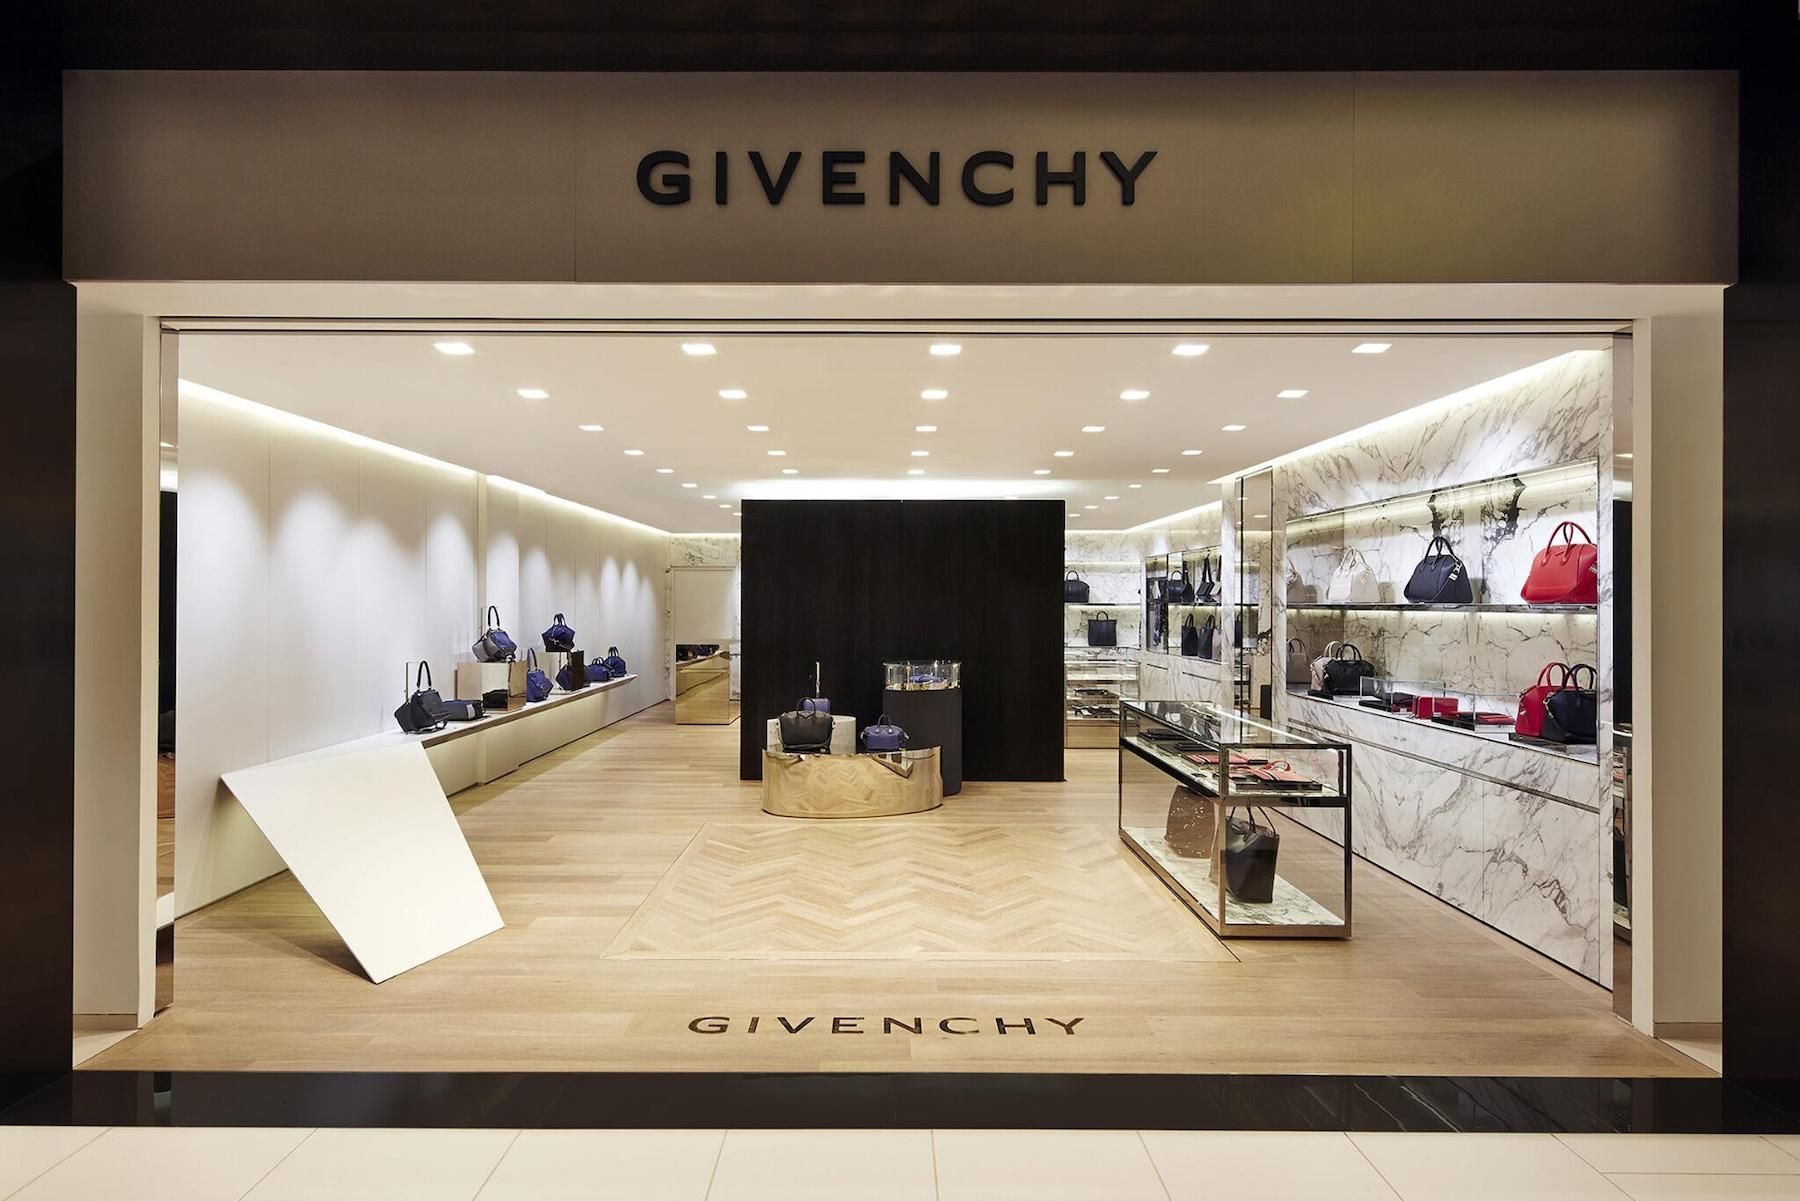 Givenchy opens Singapore store - Inside Retail Asia